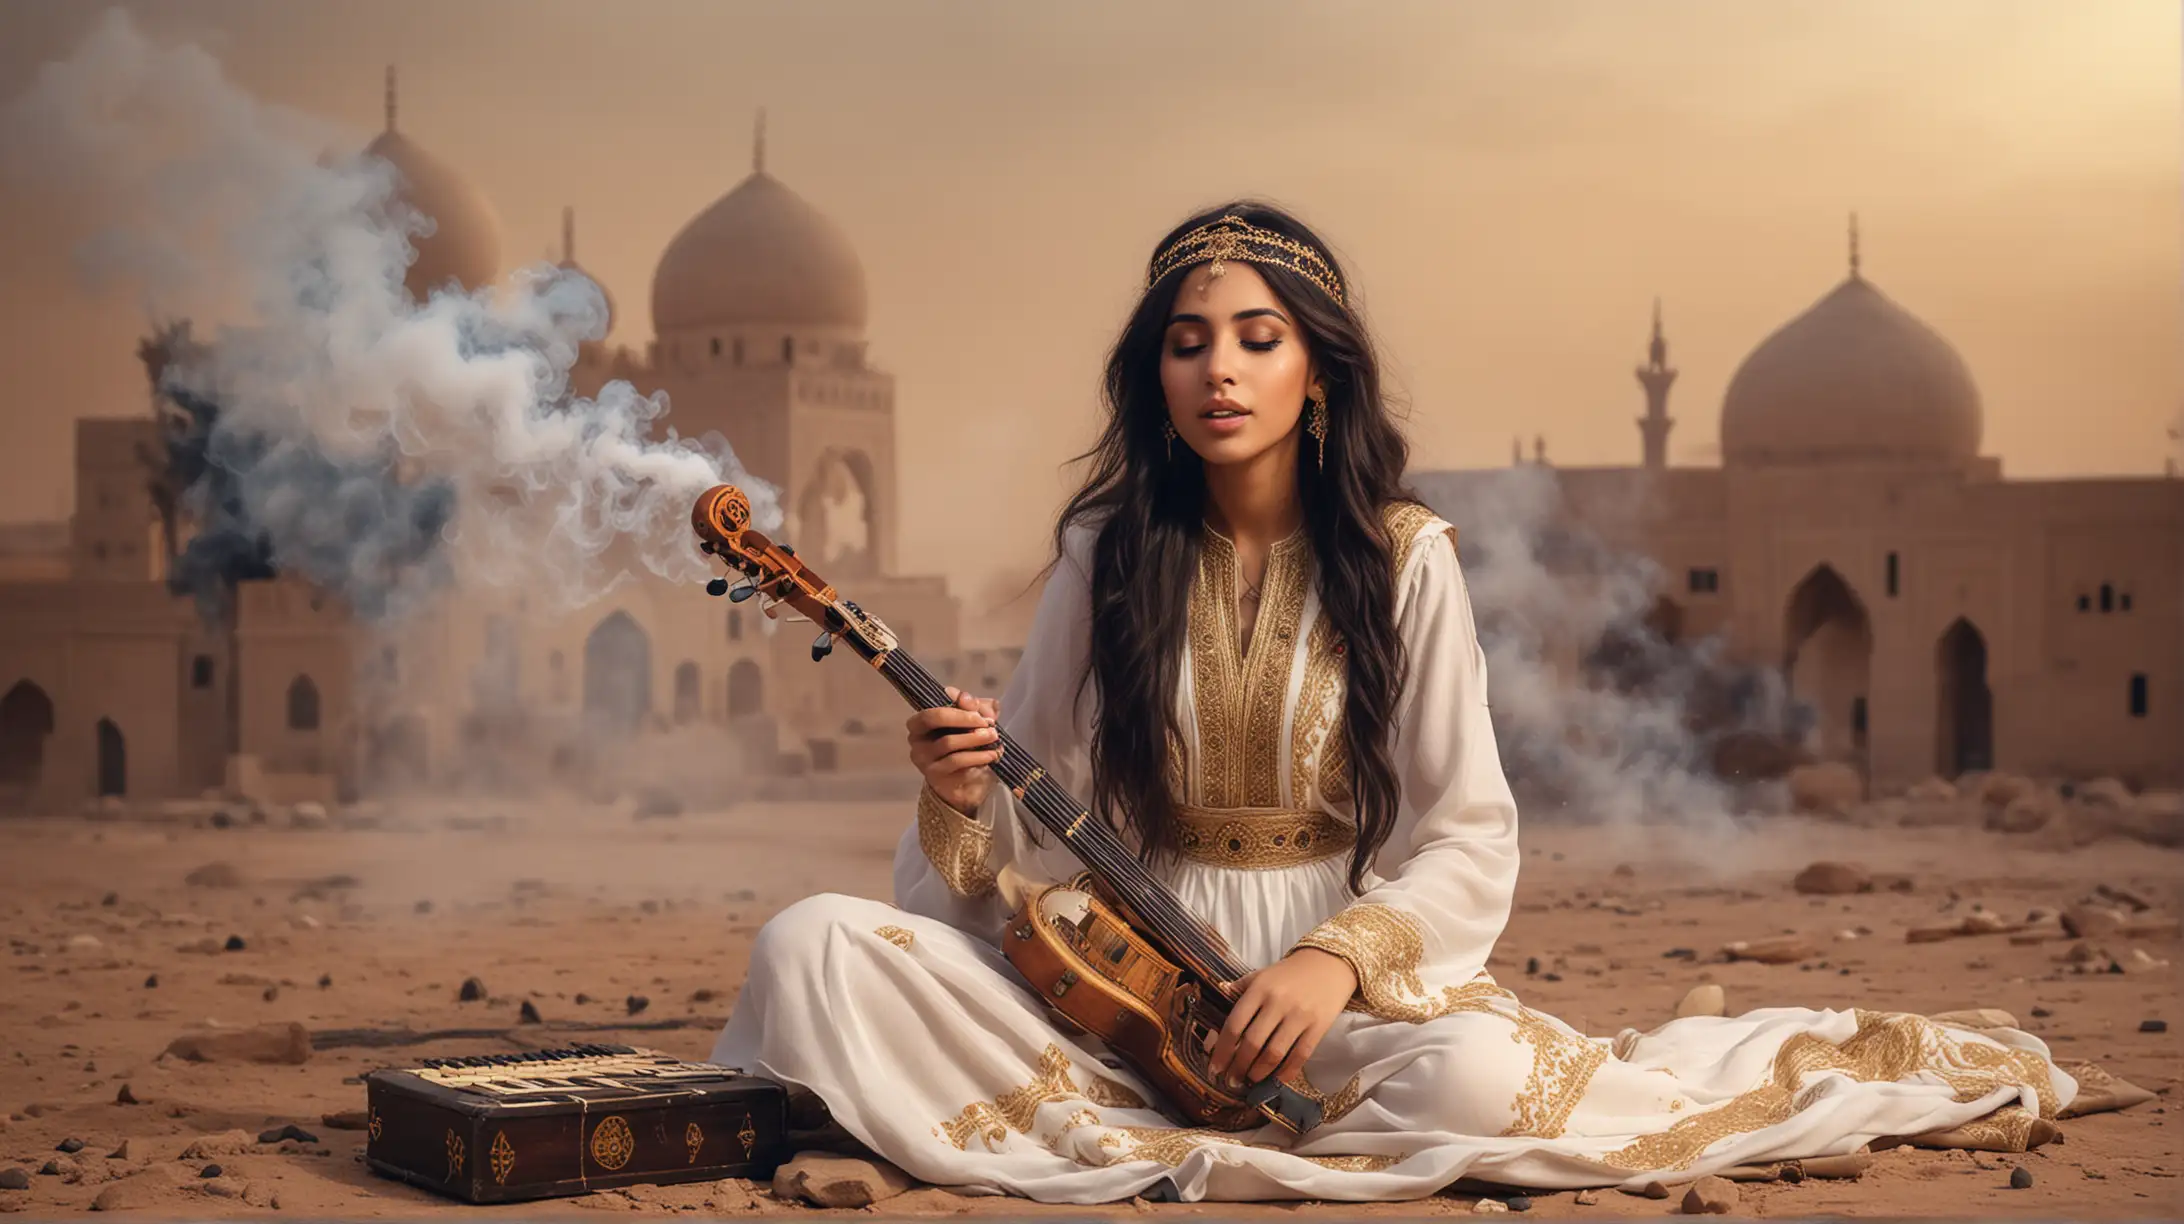 Arab princess sits on the ground and plays a musical instrument, against the backdrop of smoke and Arabic nature